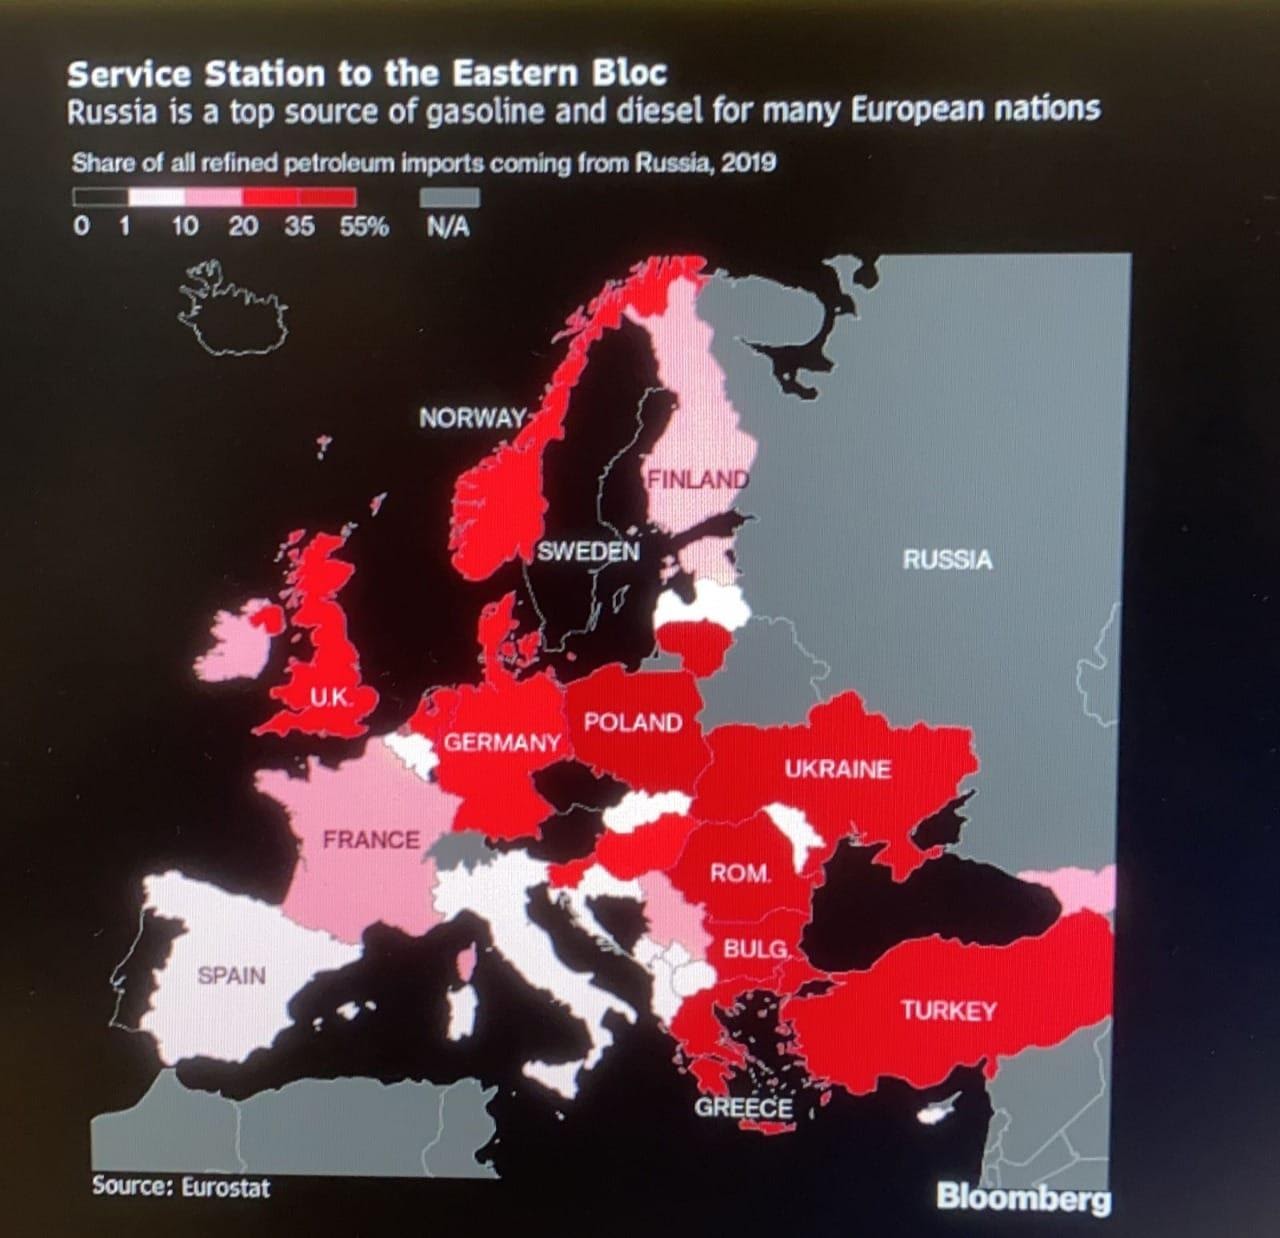 Pode ser uma imagem de mapa e texto que diz "Share Service Station to the Eastern Bloc Russia is top source of gasoline and diesel for many European nations all refined petroleum imports coming from Russia, 2019 20 35 55% N/A NORWAY FINLAND SWEDEN U.K RUSSIA POLAND GERMANY FRANCE UKRAINE ROM. SPAIN BULG. TURKEY Source: Eurostat GREECE Bloomberg"